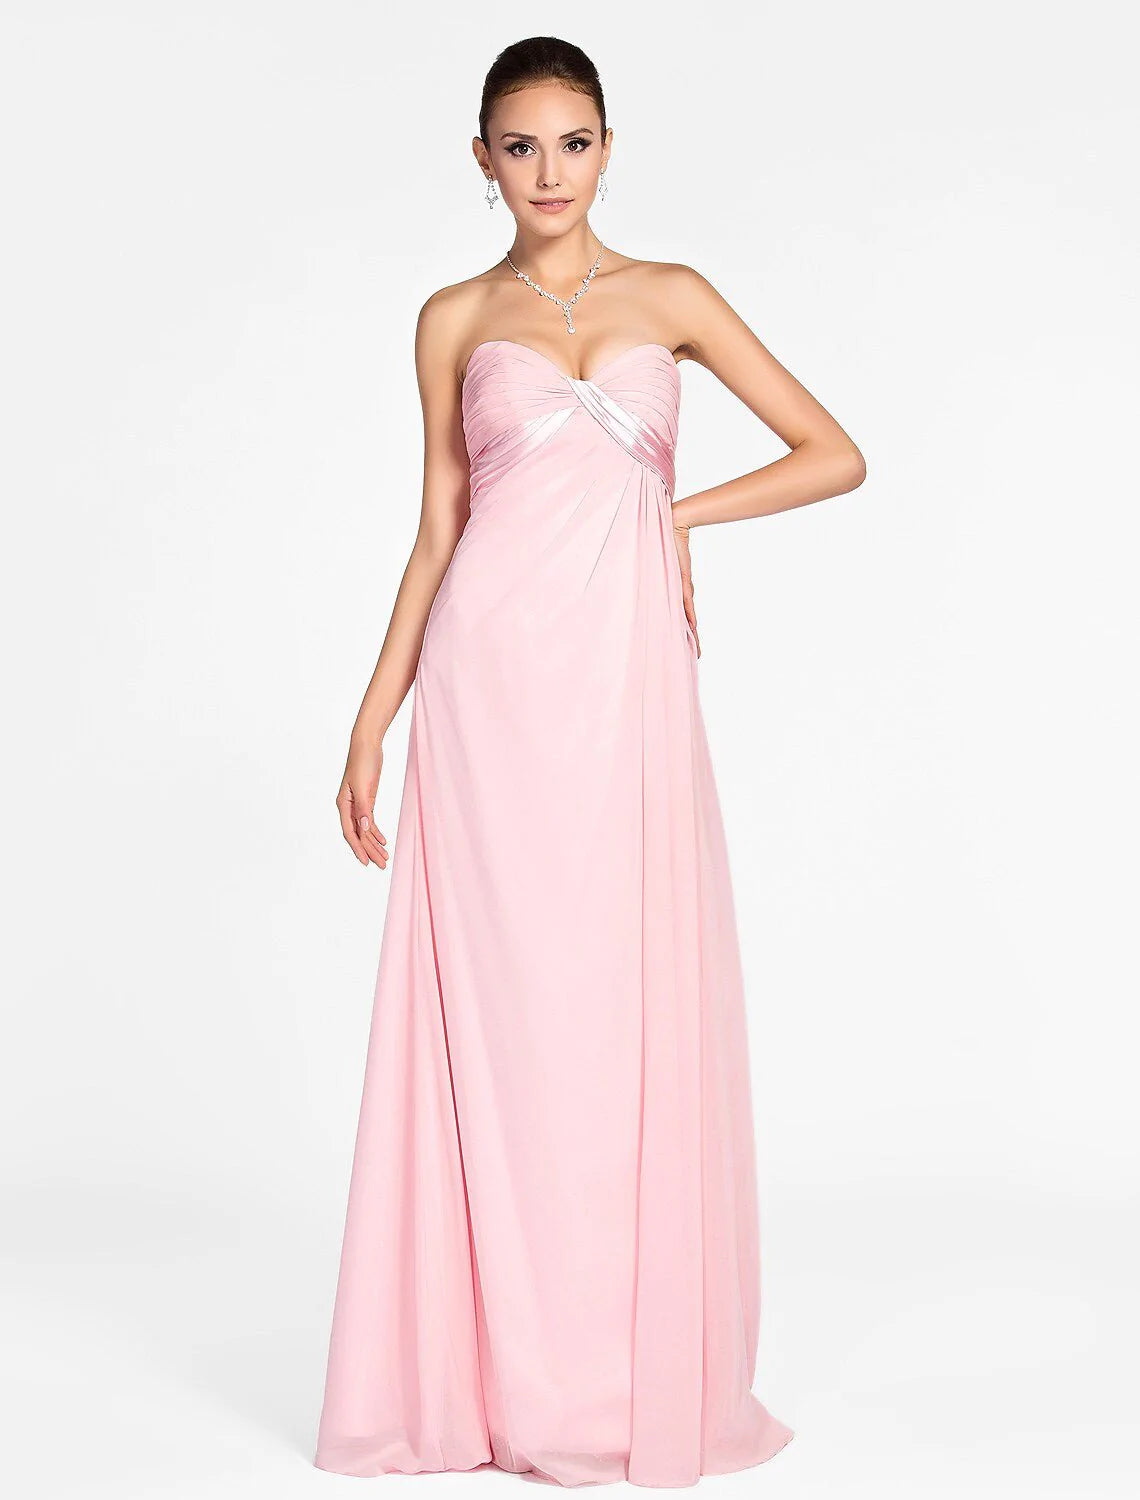 Princess / A-Line Bridesmaid Dress Sweetheart Neckline / Strapless Sleeveless Open Back Floor Length Chiffon with Criss Cross / Draping / Side Draping